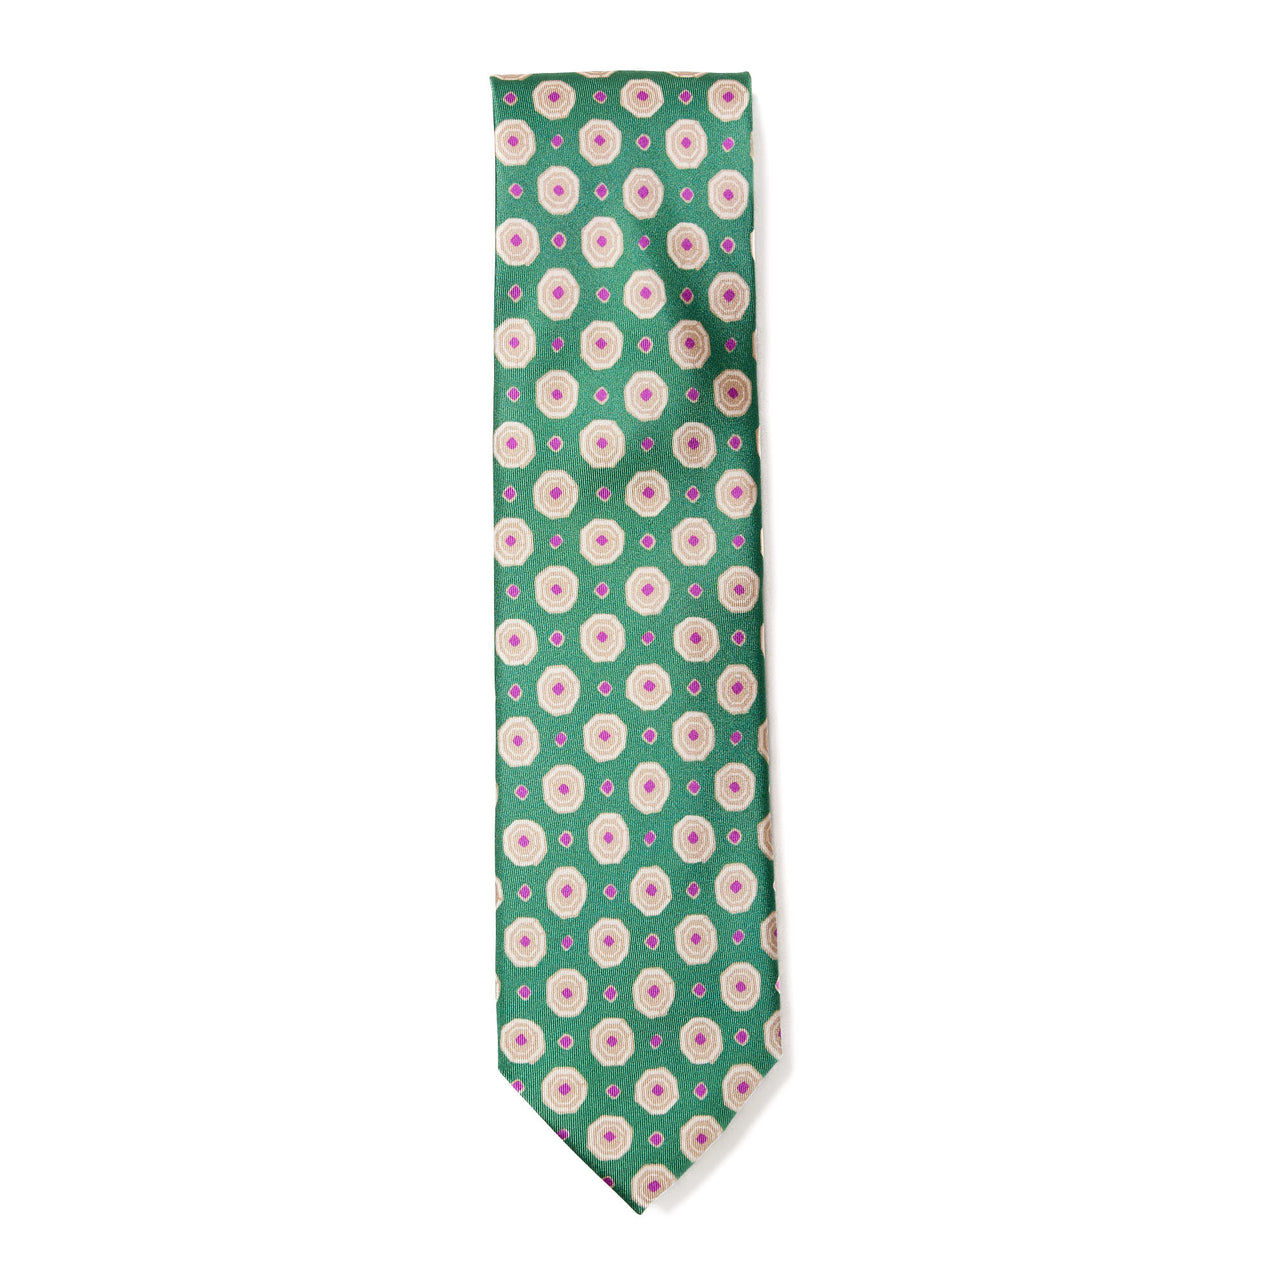 HENRY SARTORIAL X CANTINI Printed Silk Tie BOTTLE GREEN